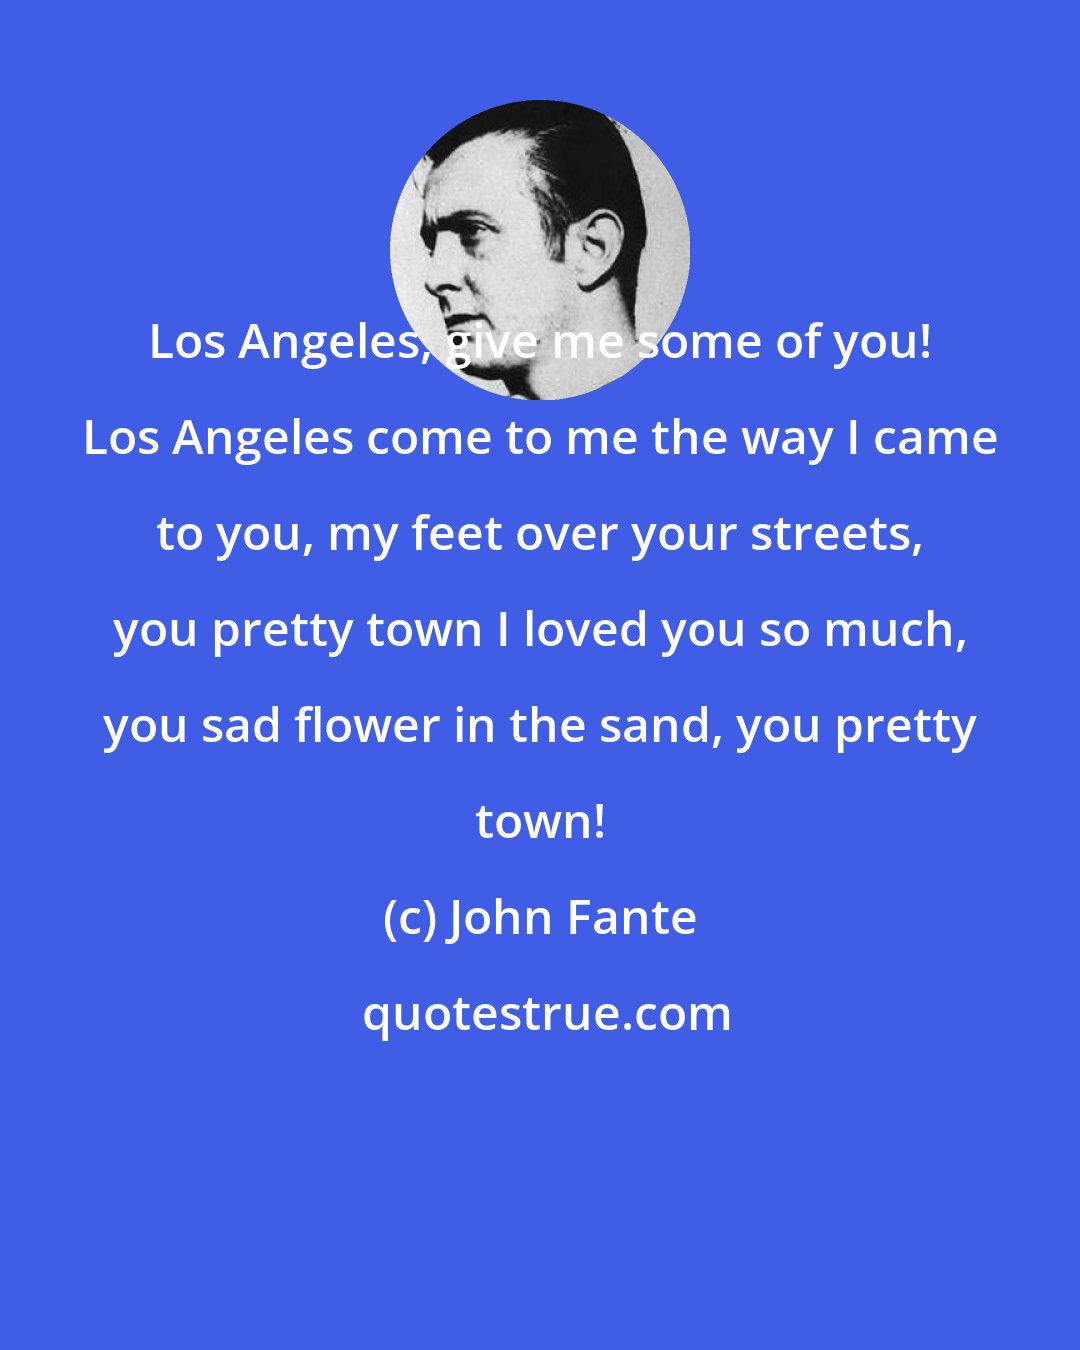 John Fante: Los Angeles, give me some of you! Los Angeles come to me the way I came to you, my feet over your streets, you pretty town I loved you so much, you sad flower in the sand, you pretty town!